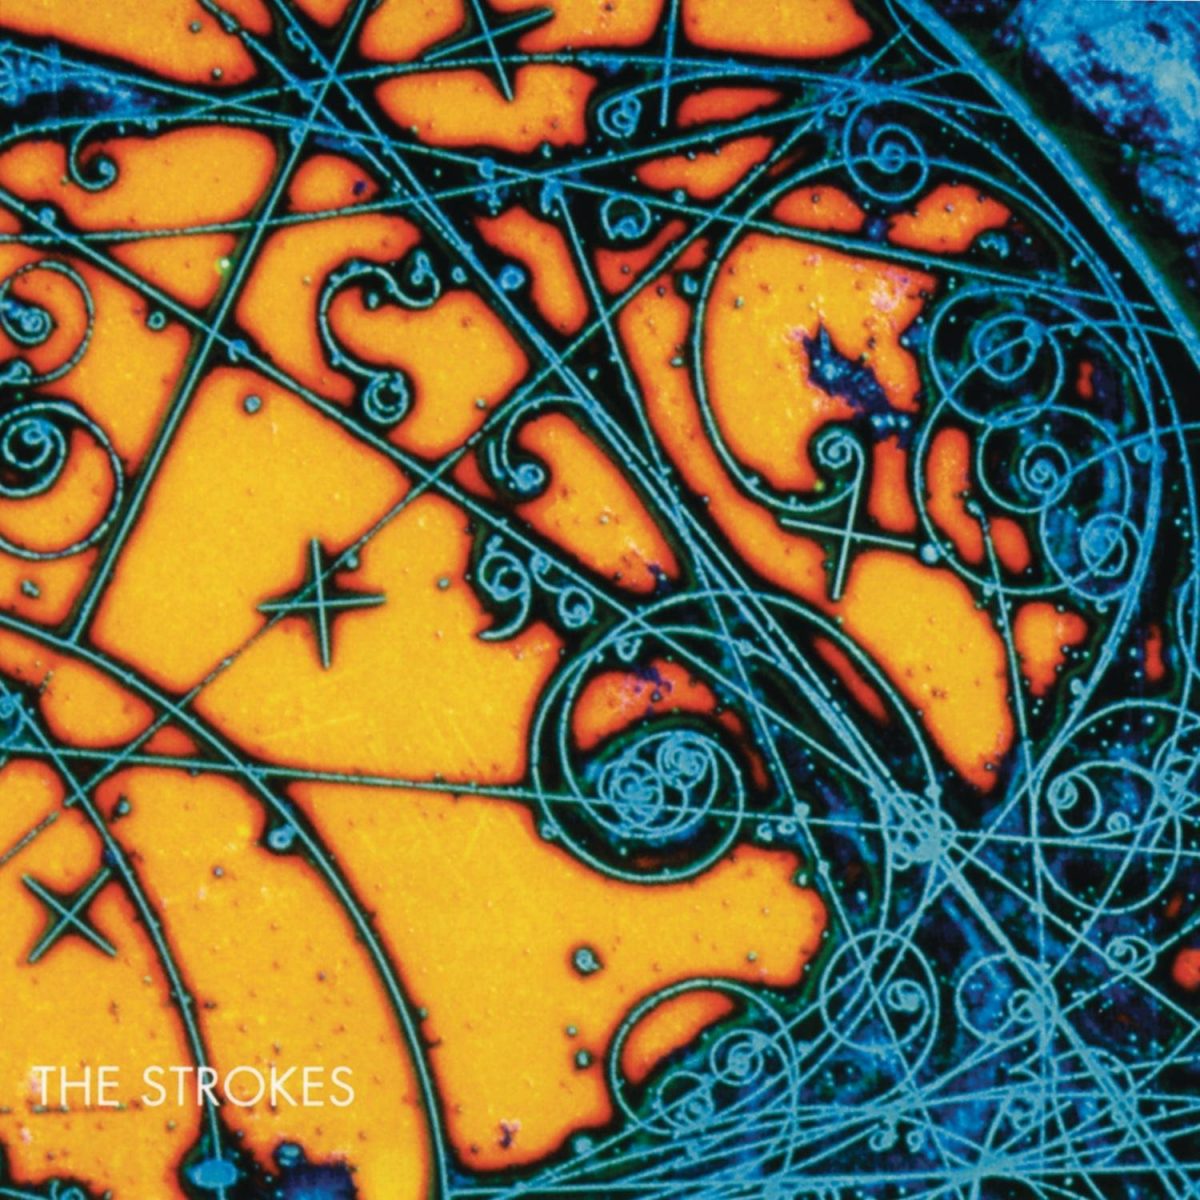 The Strokes Released Debut Album "Is This It" 20 Years Ago Today